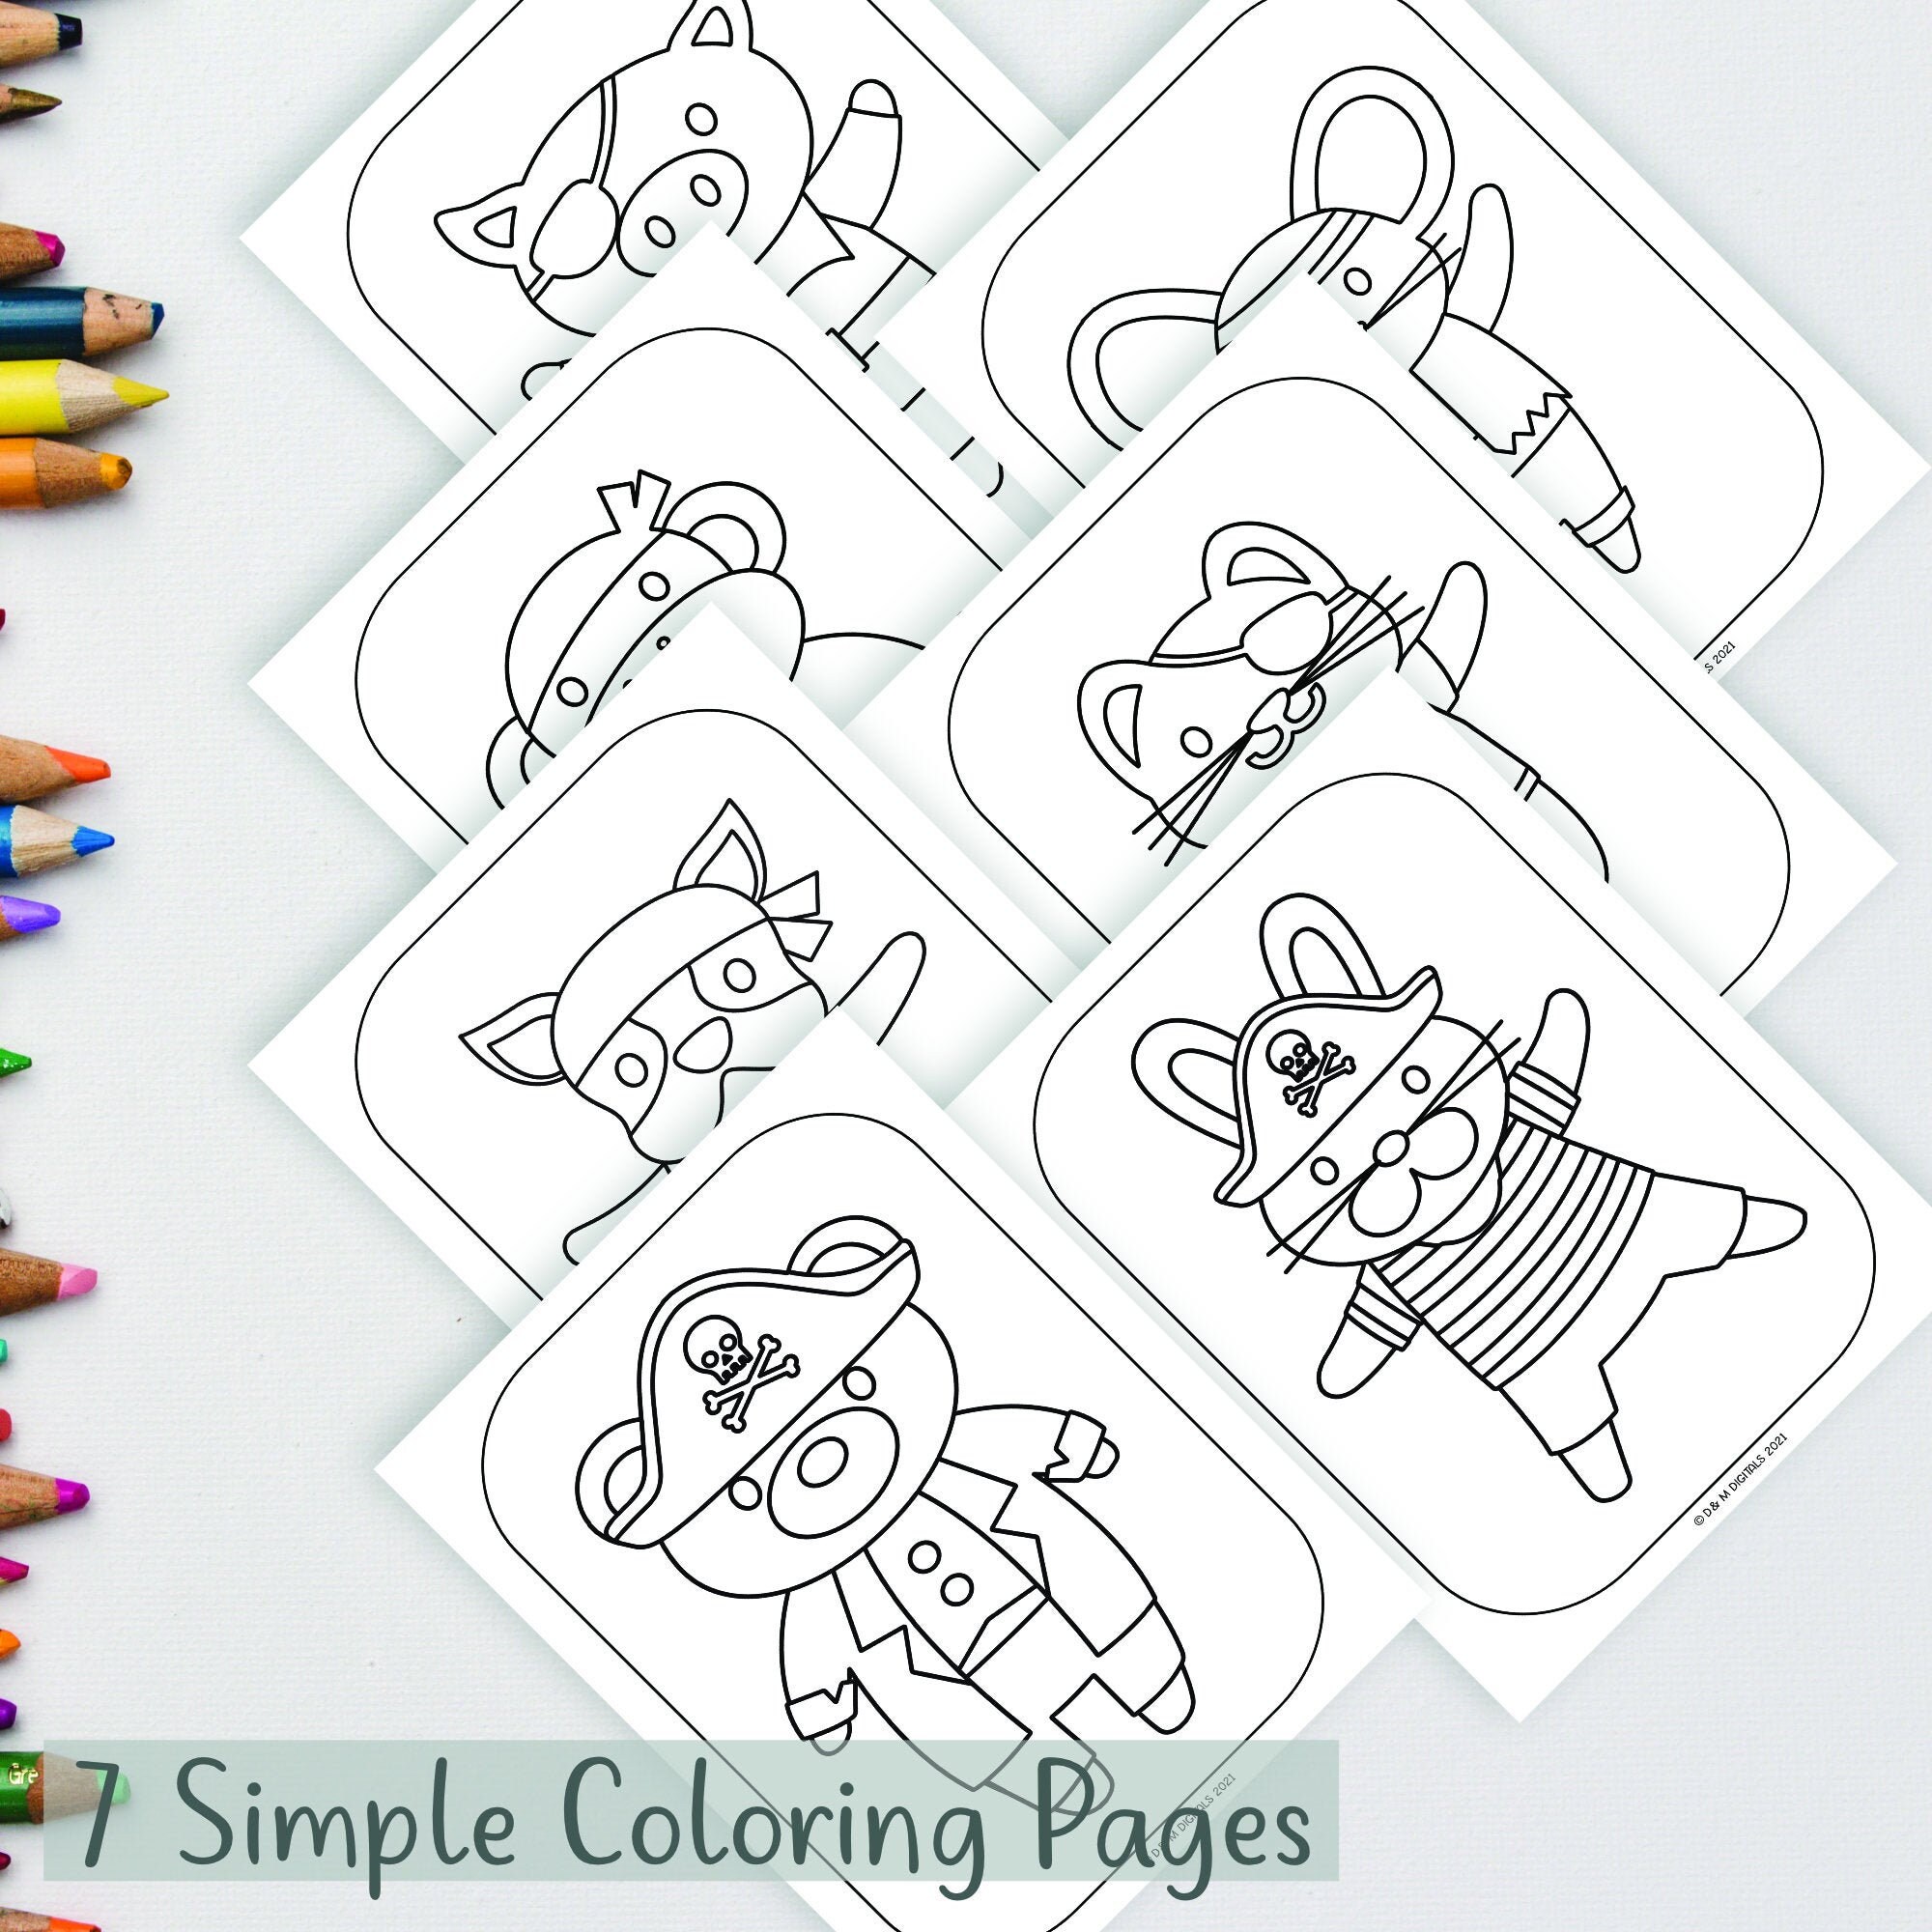 Simple Coloring Pages Easy Colouring Pages Printable | Etsy